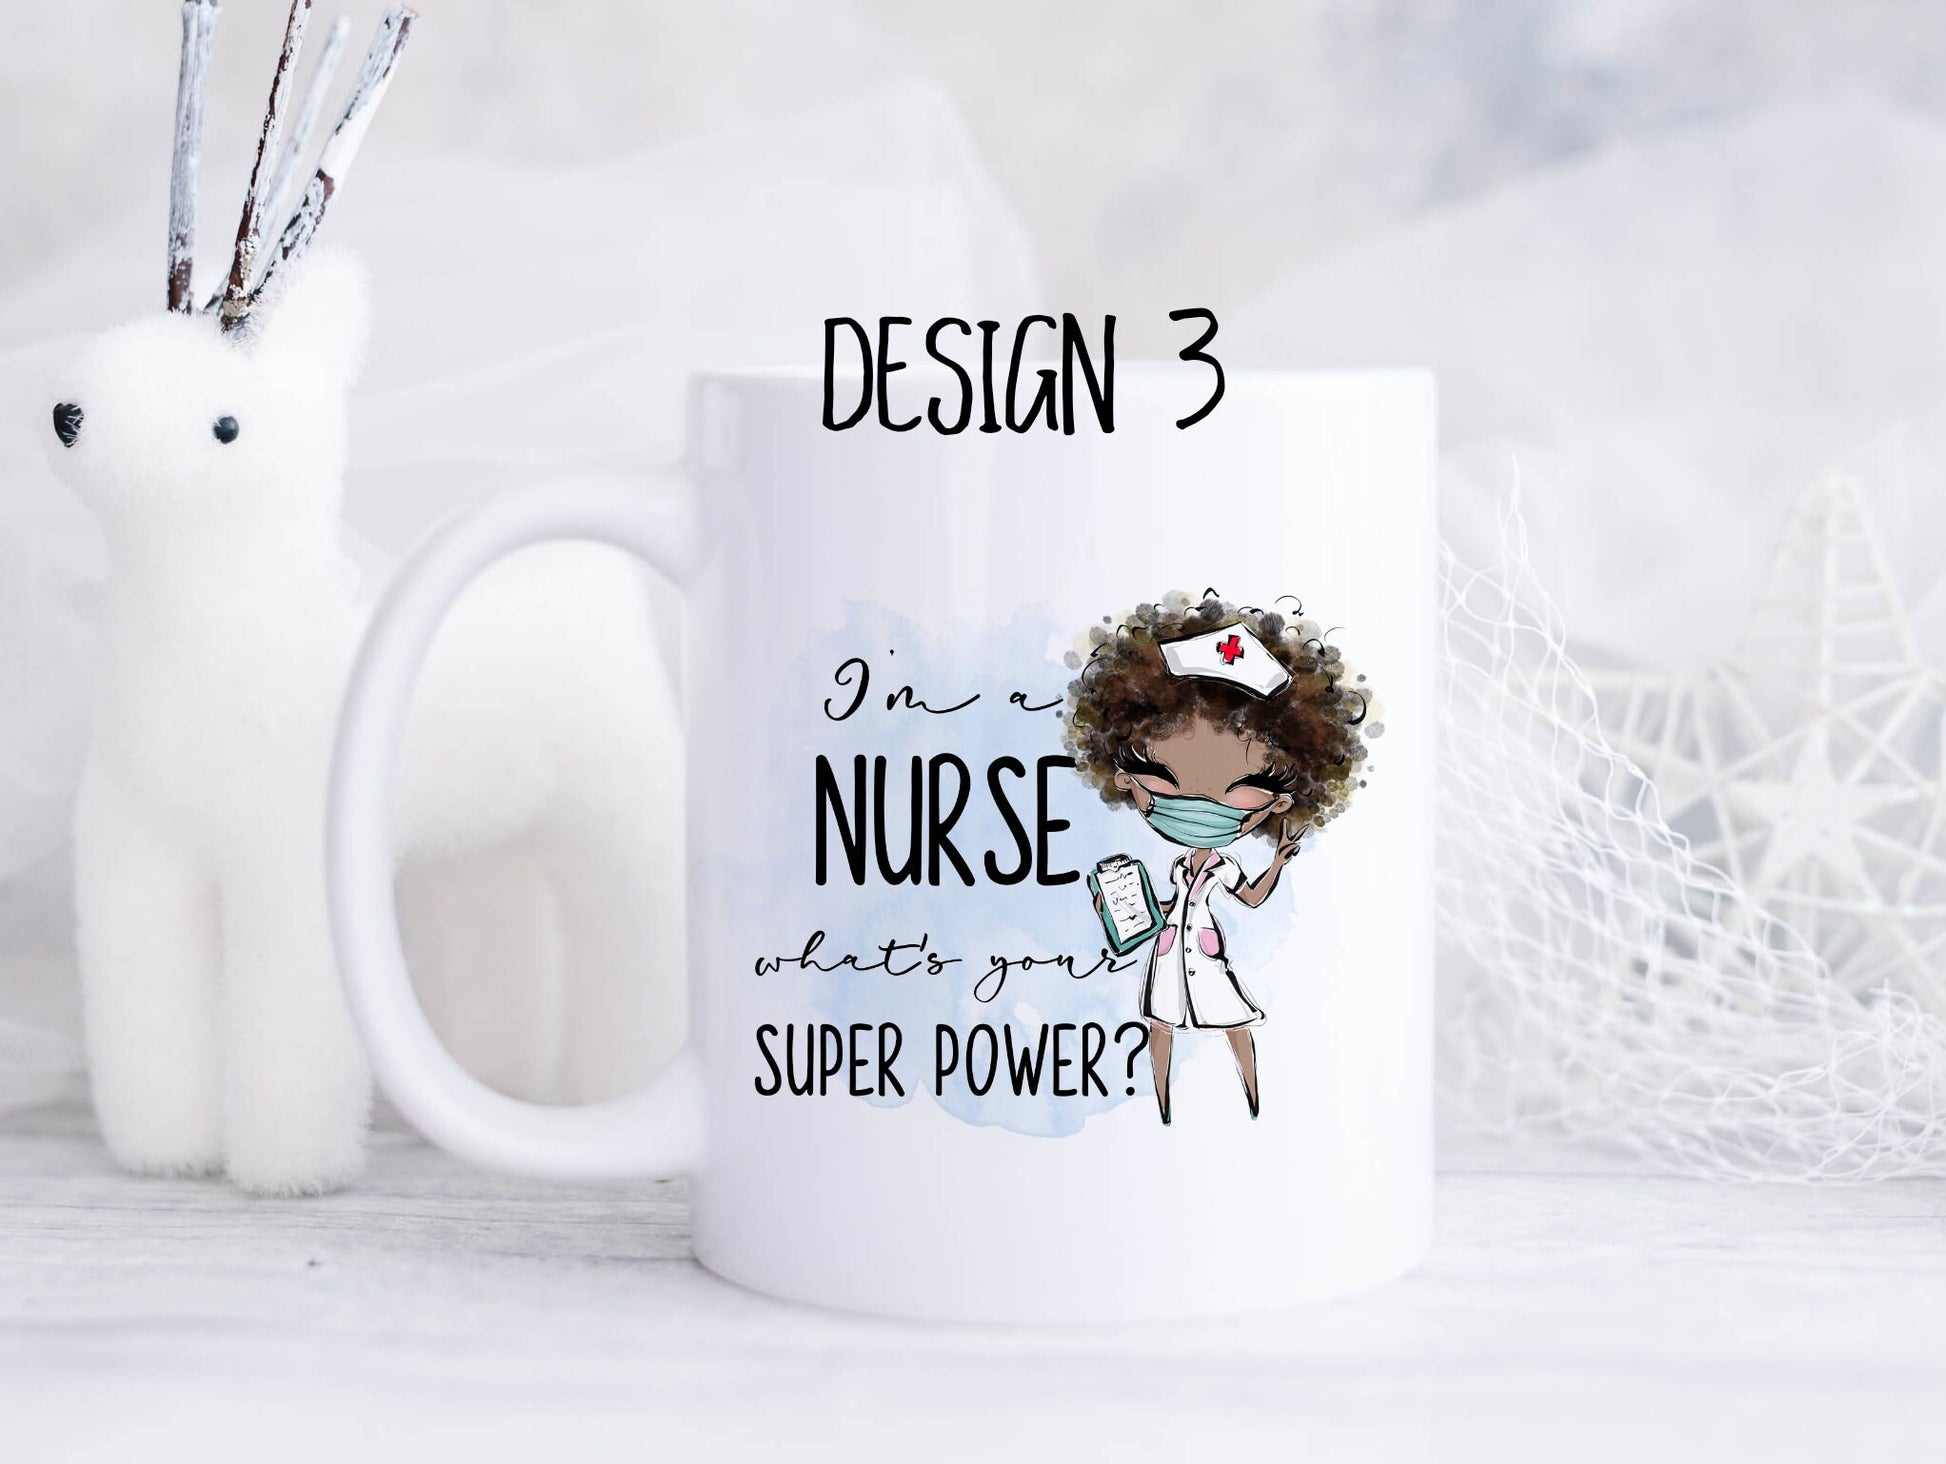 Ceramic mug featuring a nurse with brown curly hair and the text 'I'm a nurse, what's your superpower?'